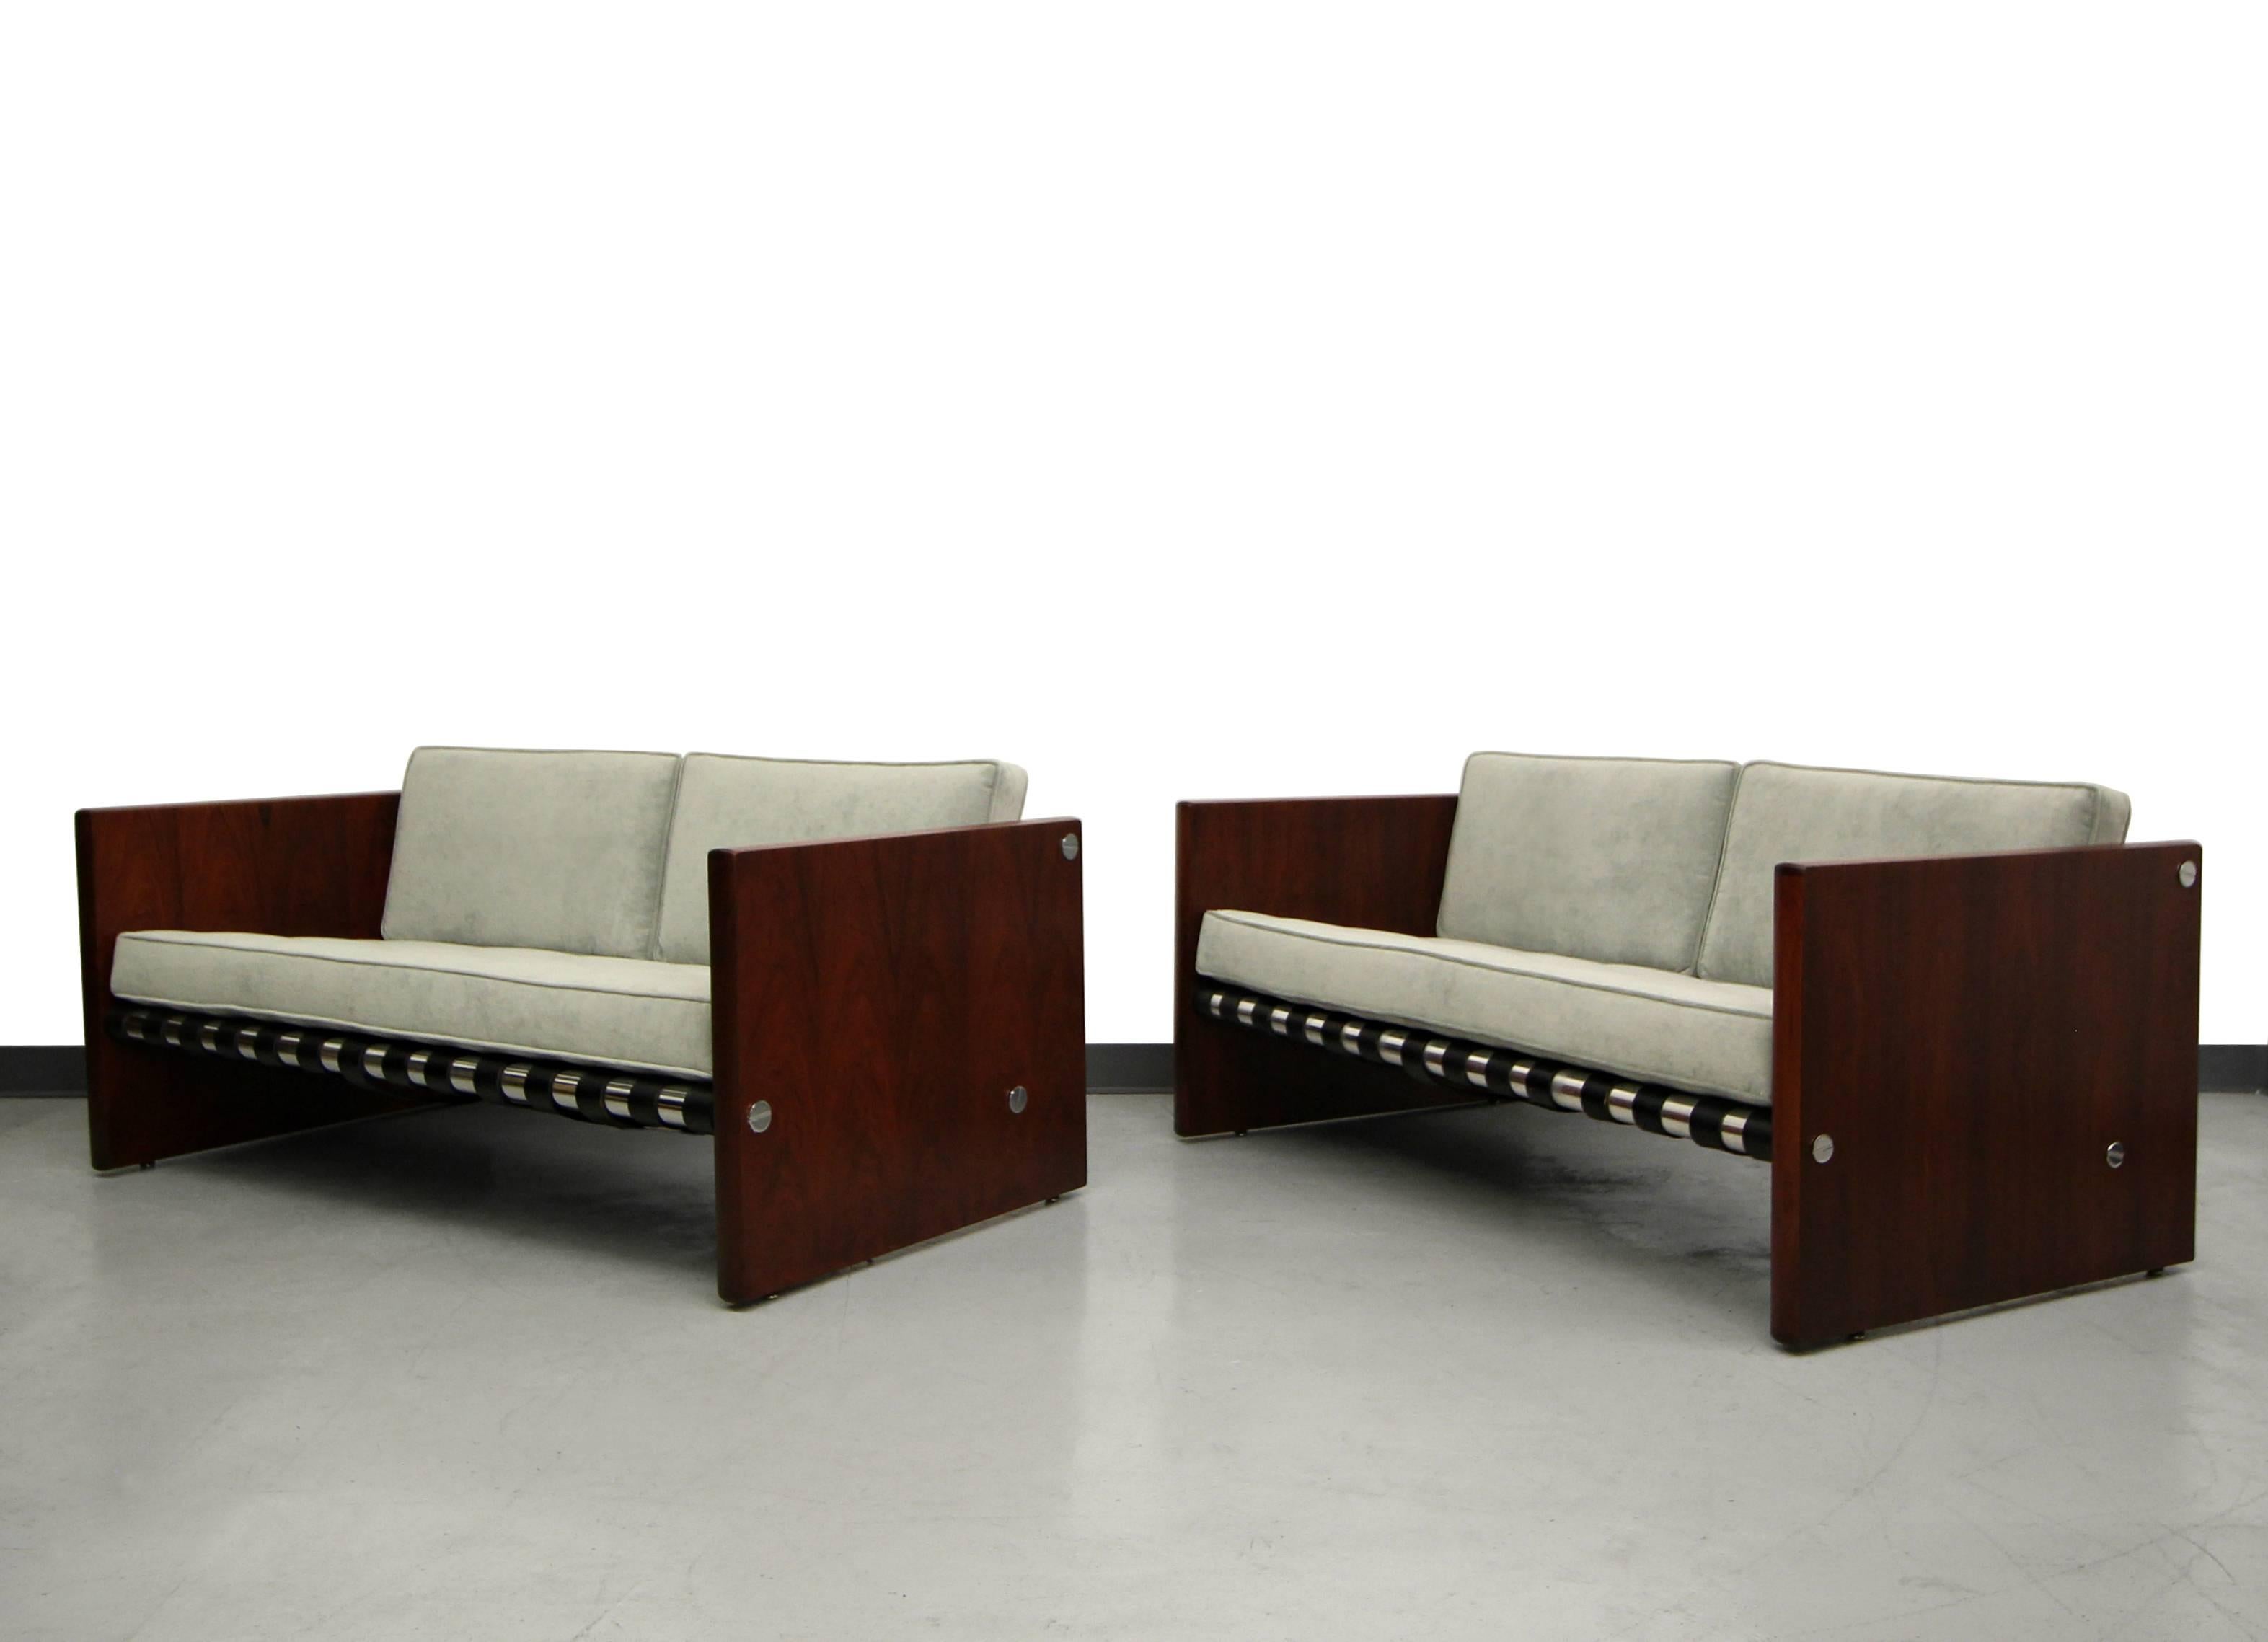 Absolutely perfect duo. A pair of Mid-Century Danish rosewood and chrome sling sofas. Sofas feature rosewood slab sides with three chrome rails that support a set of leather straps that create a sling for the cushions. These sofas have a beautiful